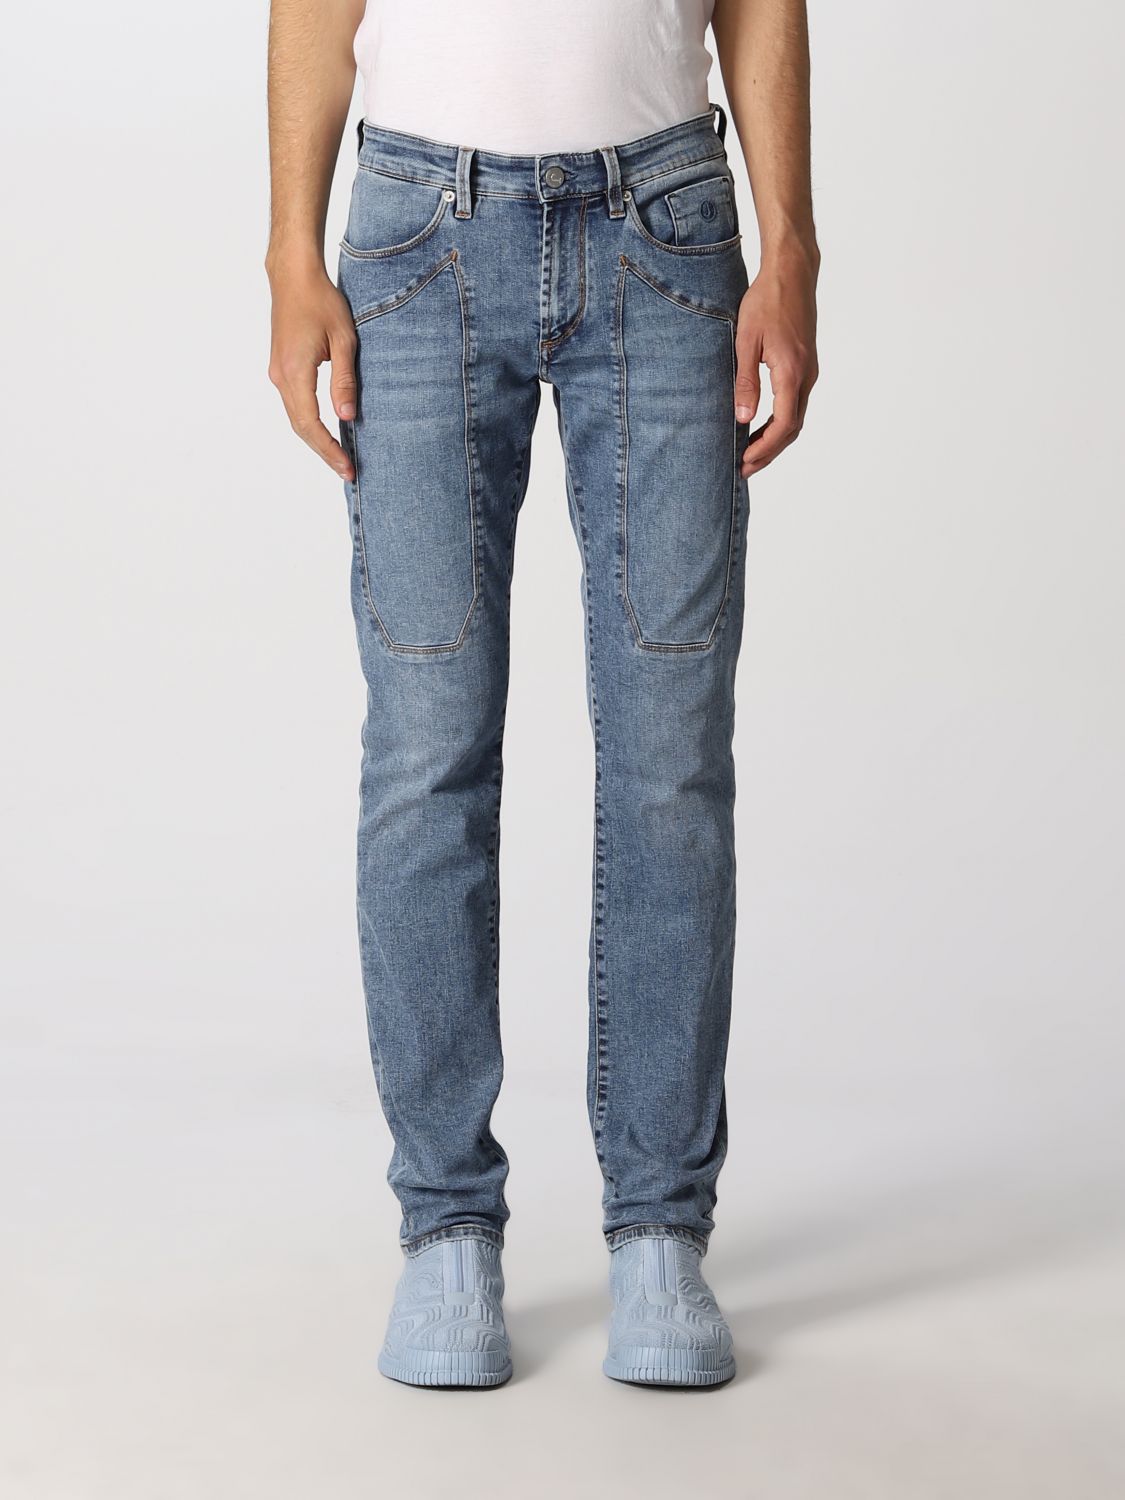 Jeckerson Slim Jeans With Patches In Stone Washed